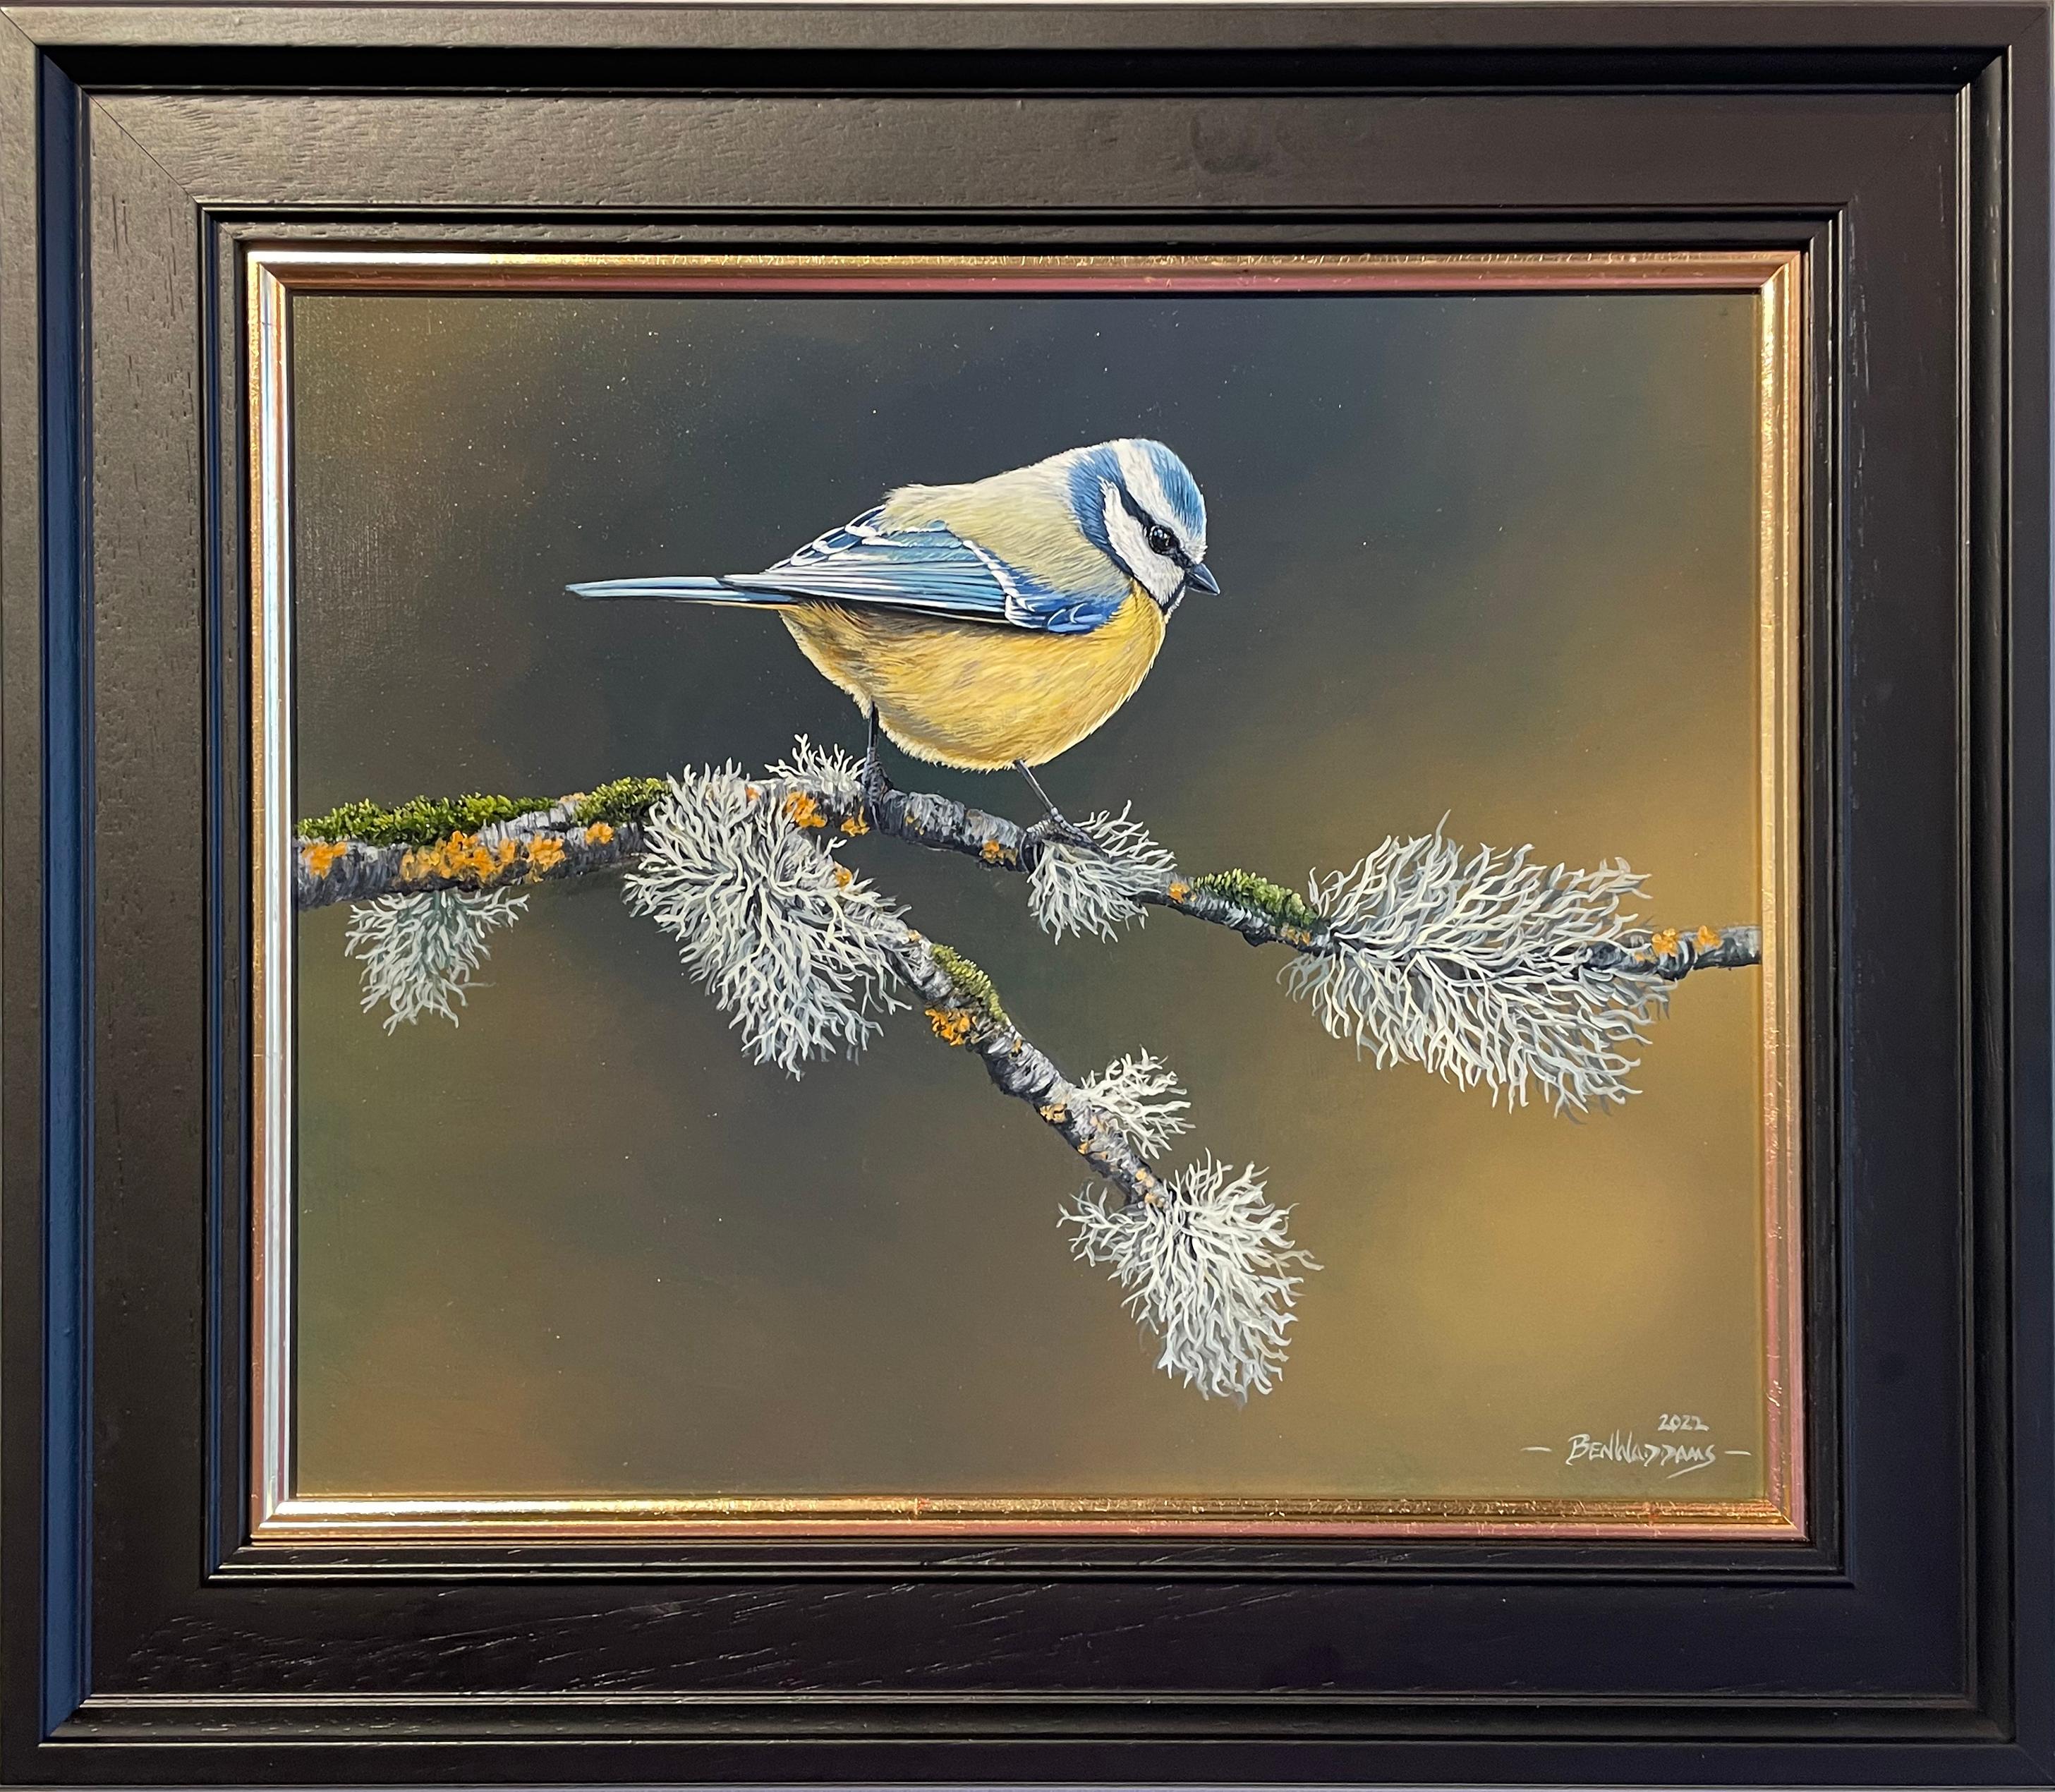 Ben Waddams Animal Painting - 'Balancing Act' Contemporary Photorealist painting of Blue Tit bird in the wild